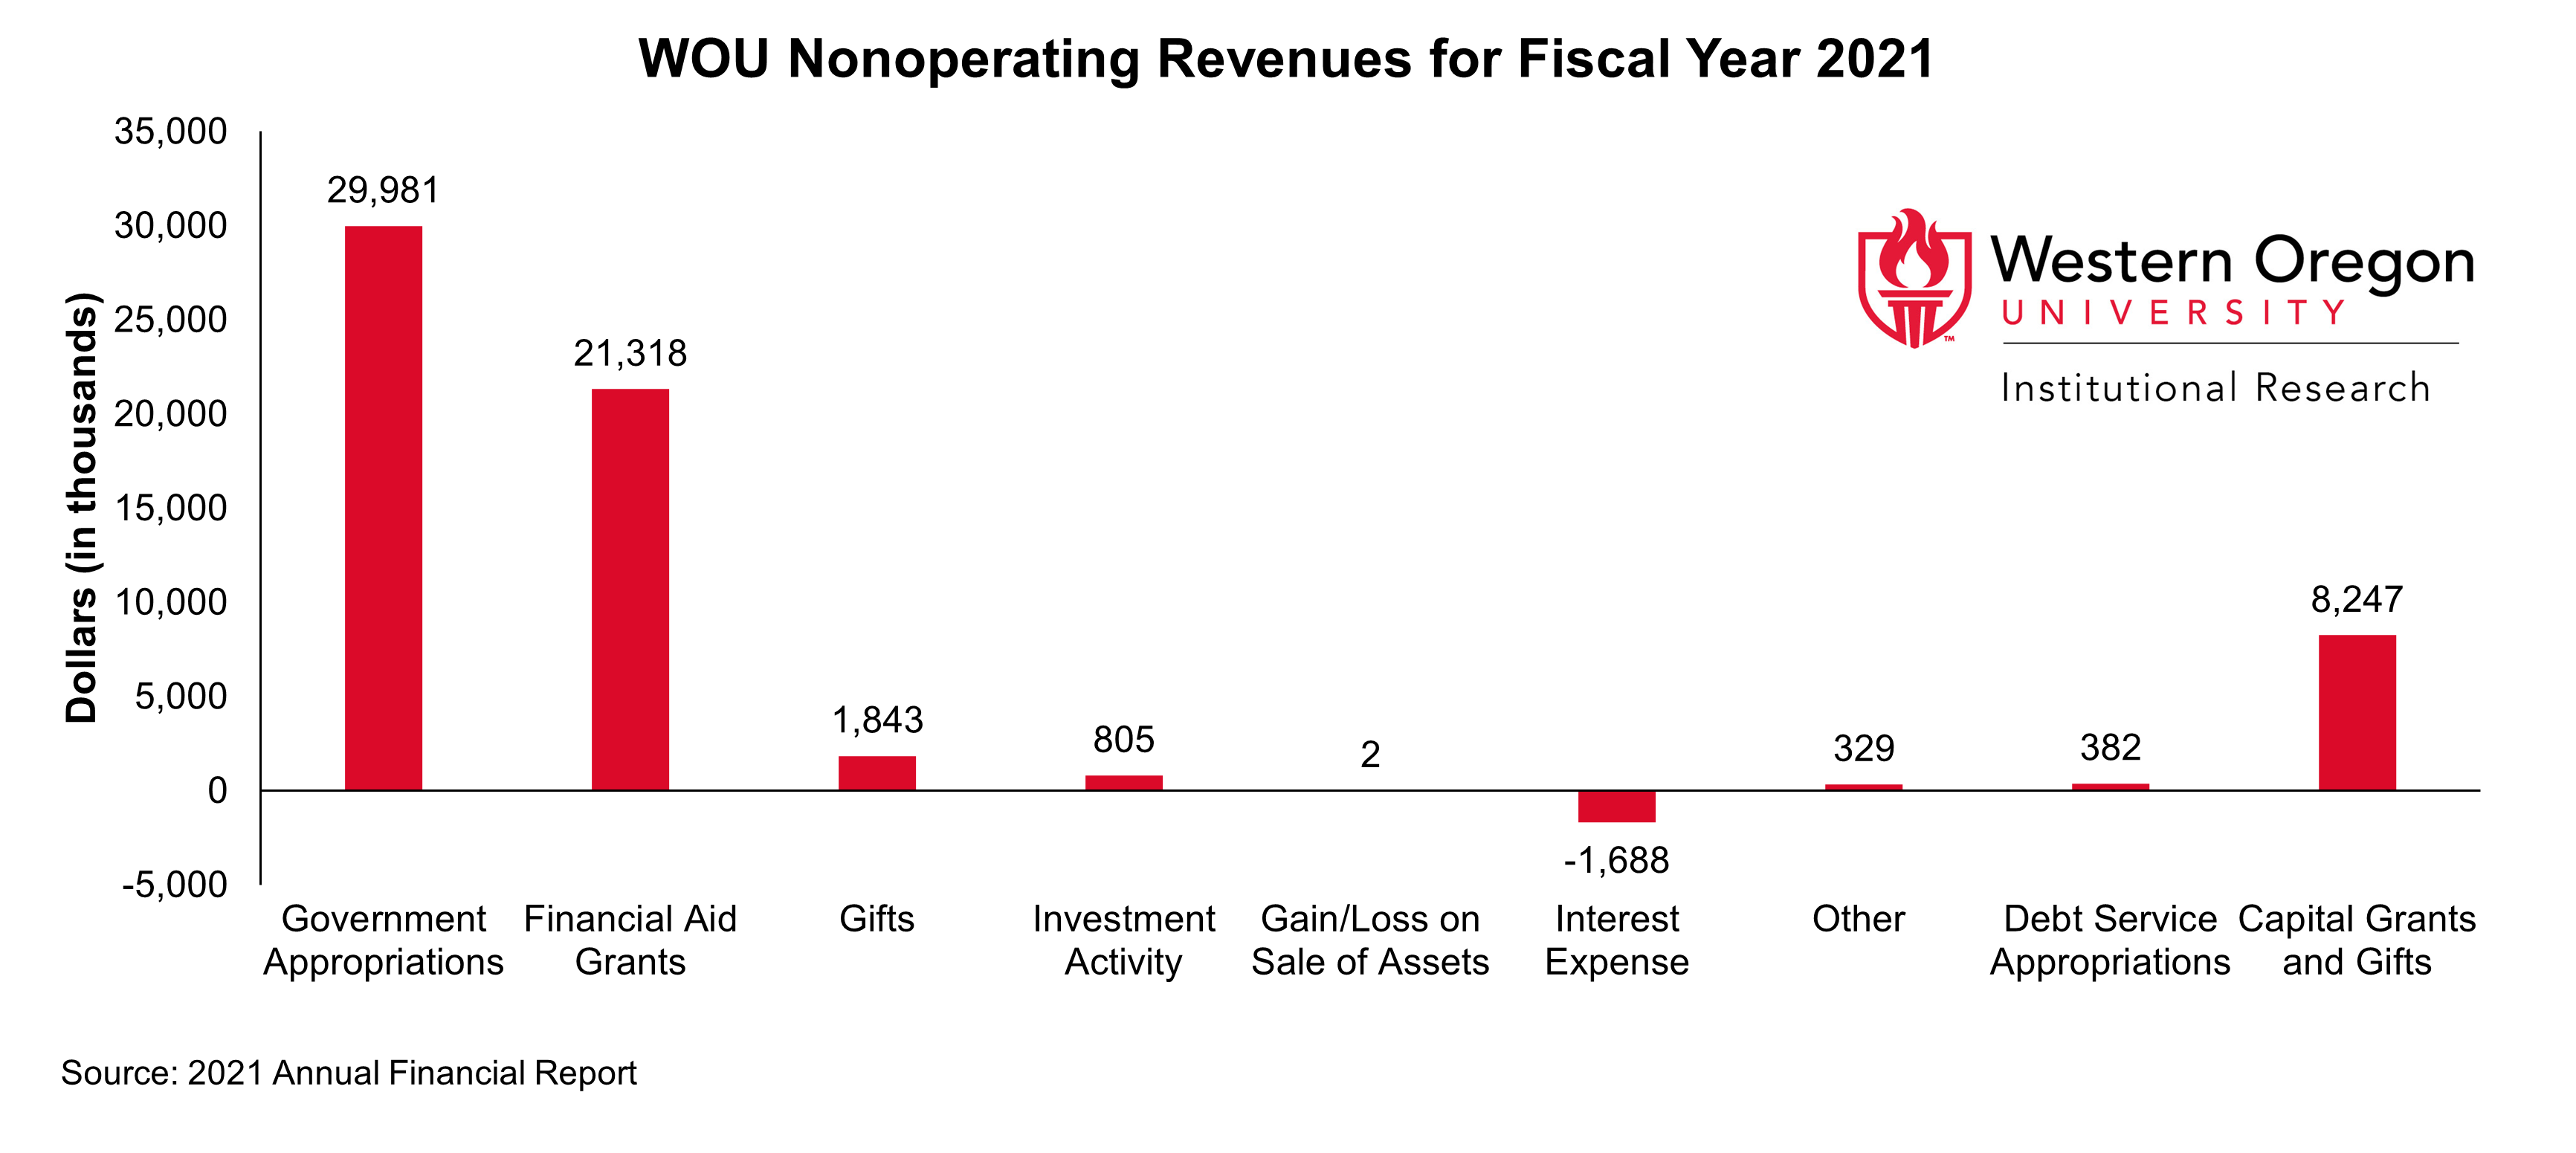 Bar graph of nonoperating revenues at WOU in 2021, broken out by revenue type, showing that government appropriations is the largest revenue type